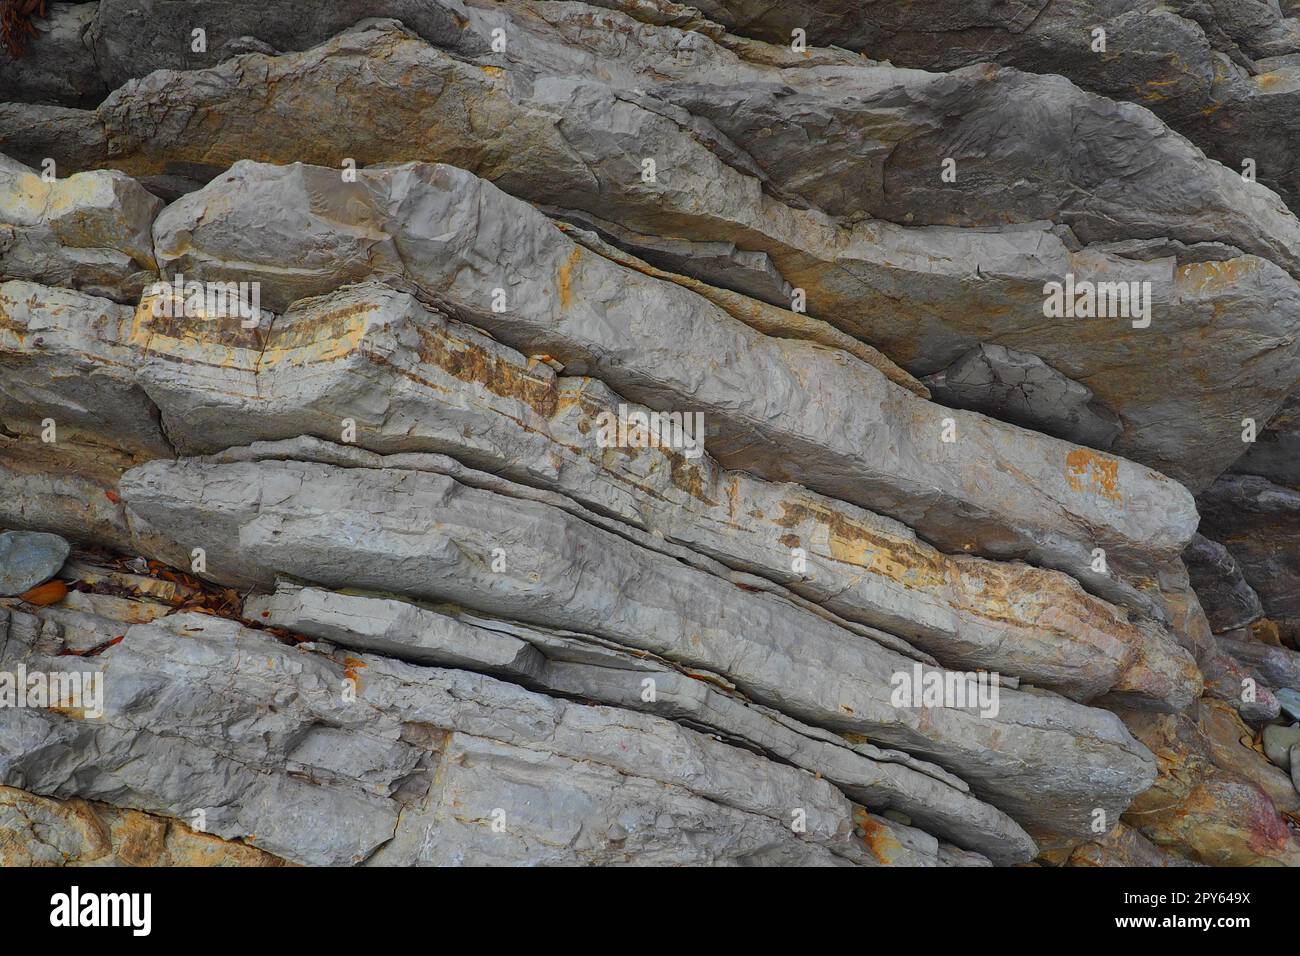 Flysch is a series of marine sedimentary rocks that are predominantly clastic in origin and are characterized by the alternation of several lithological layers. Balkans, Montenegro Herceg Novi Meljine Stock Photo